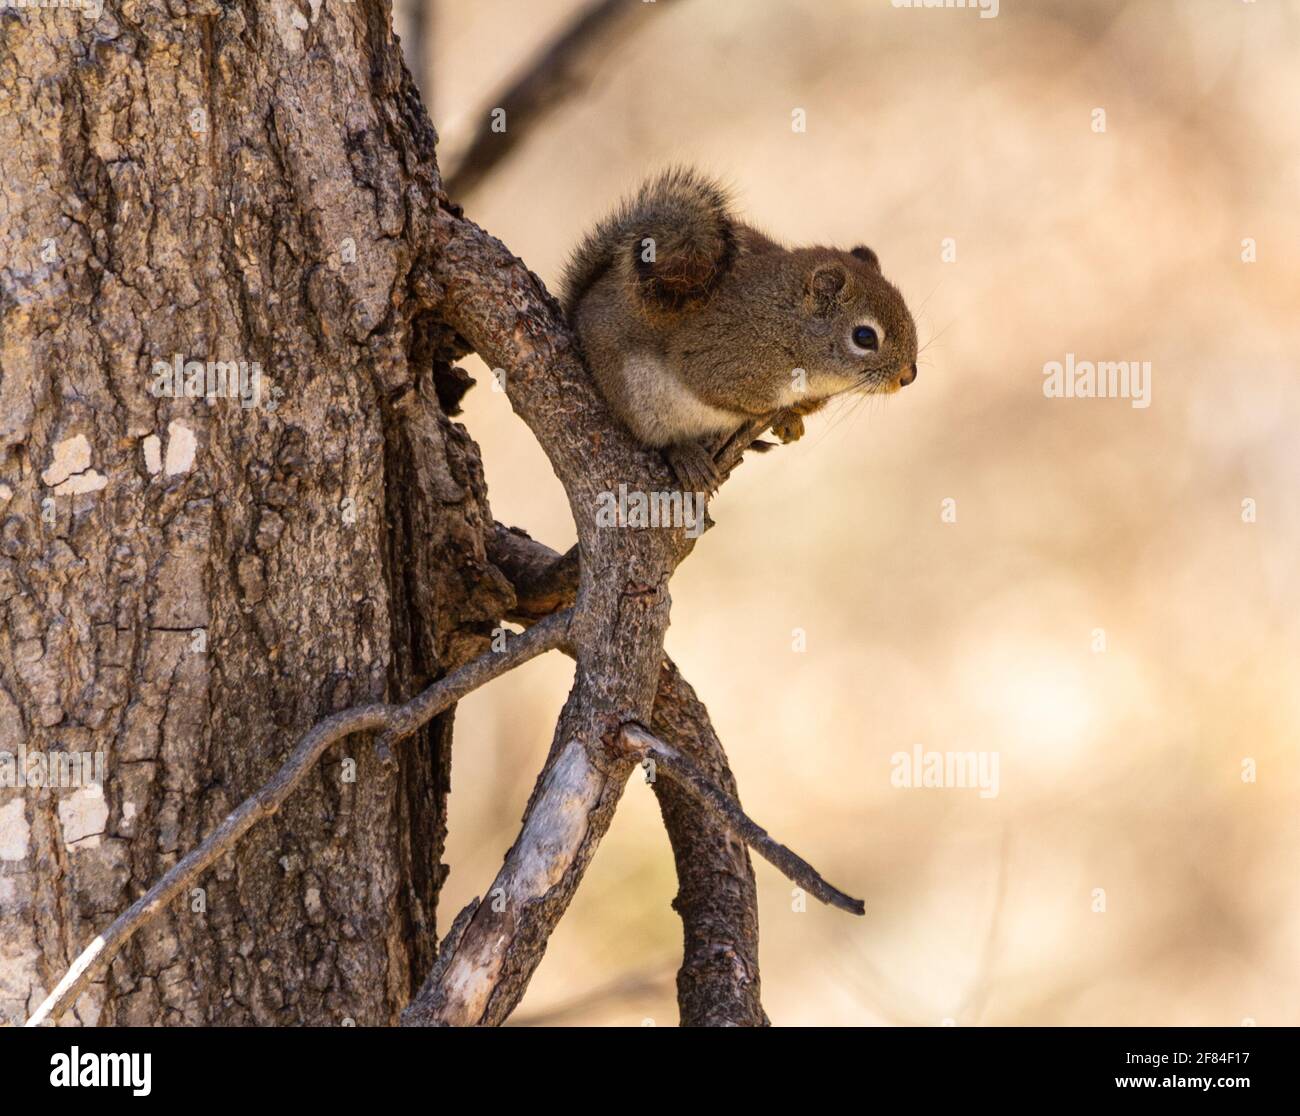 Small red squirrel perched in a tree, with its tail curled up on its back. Stock Photo